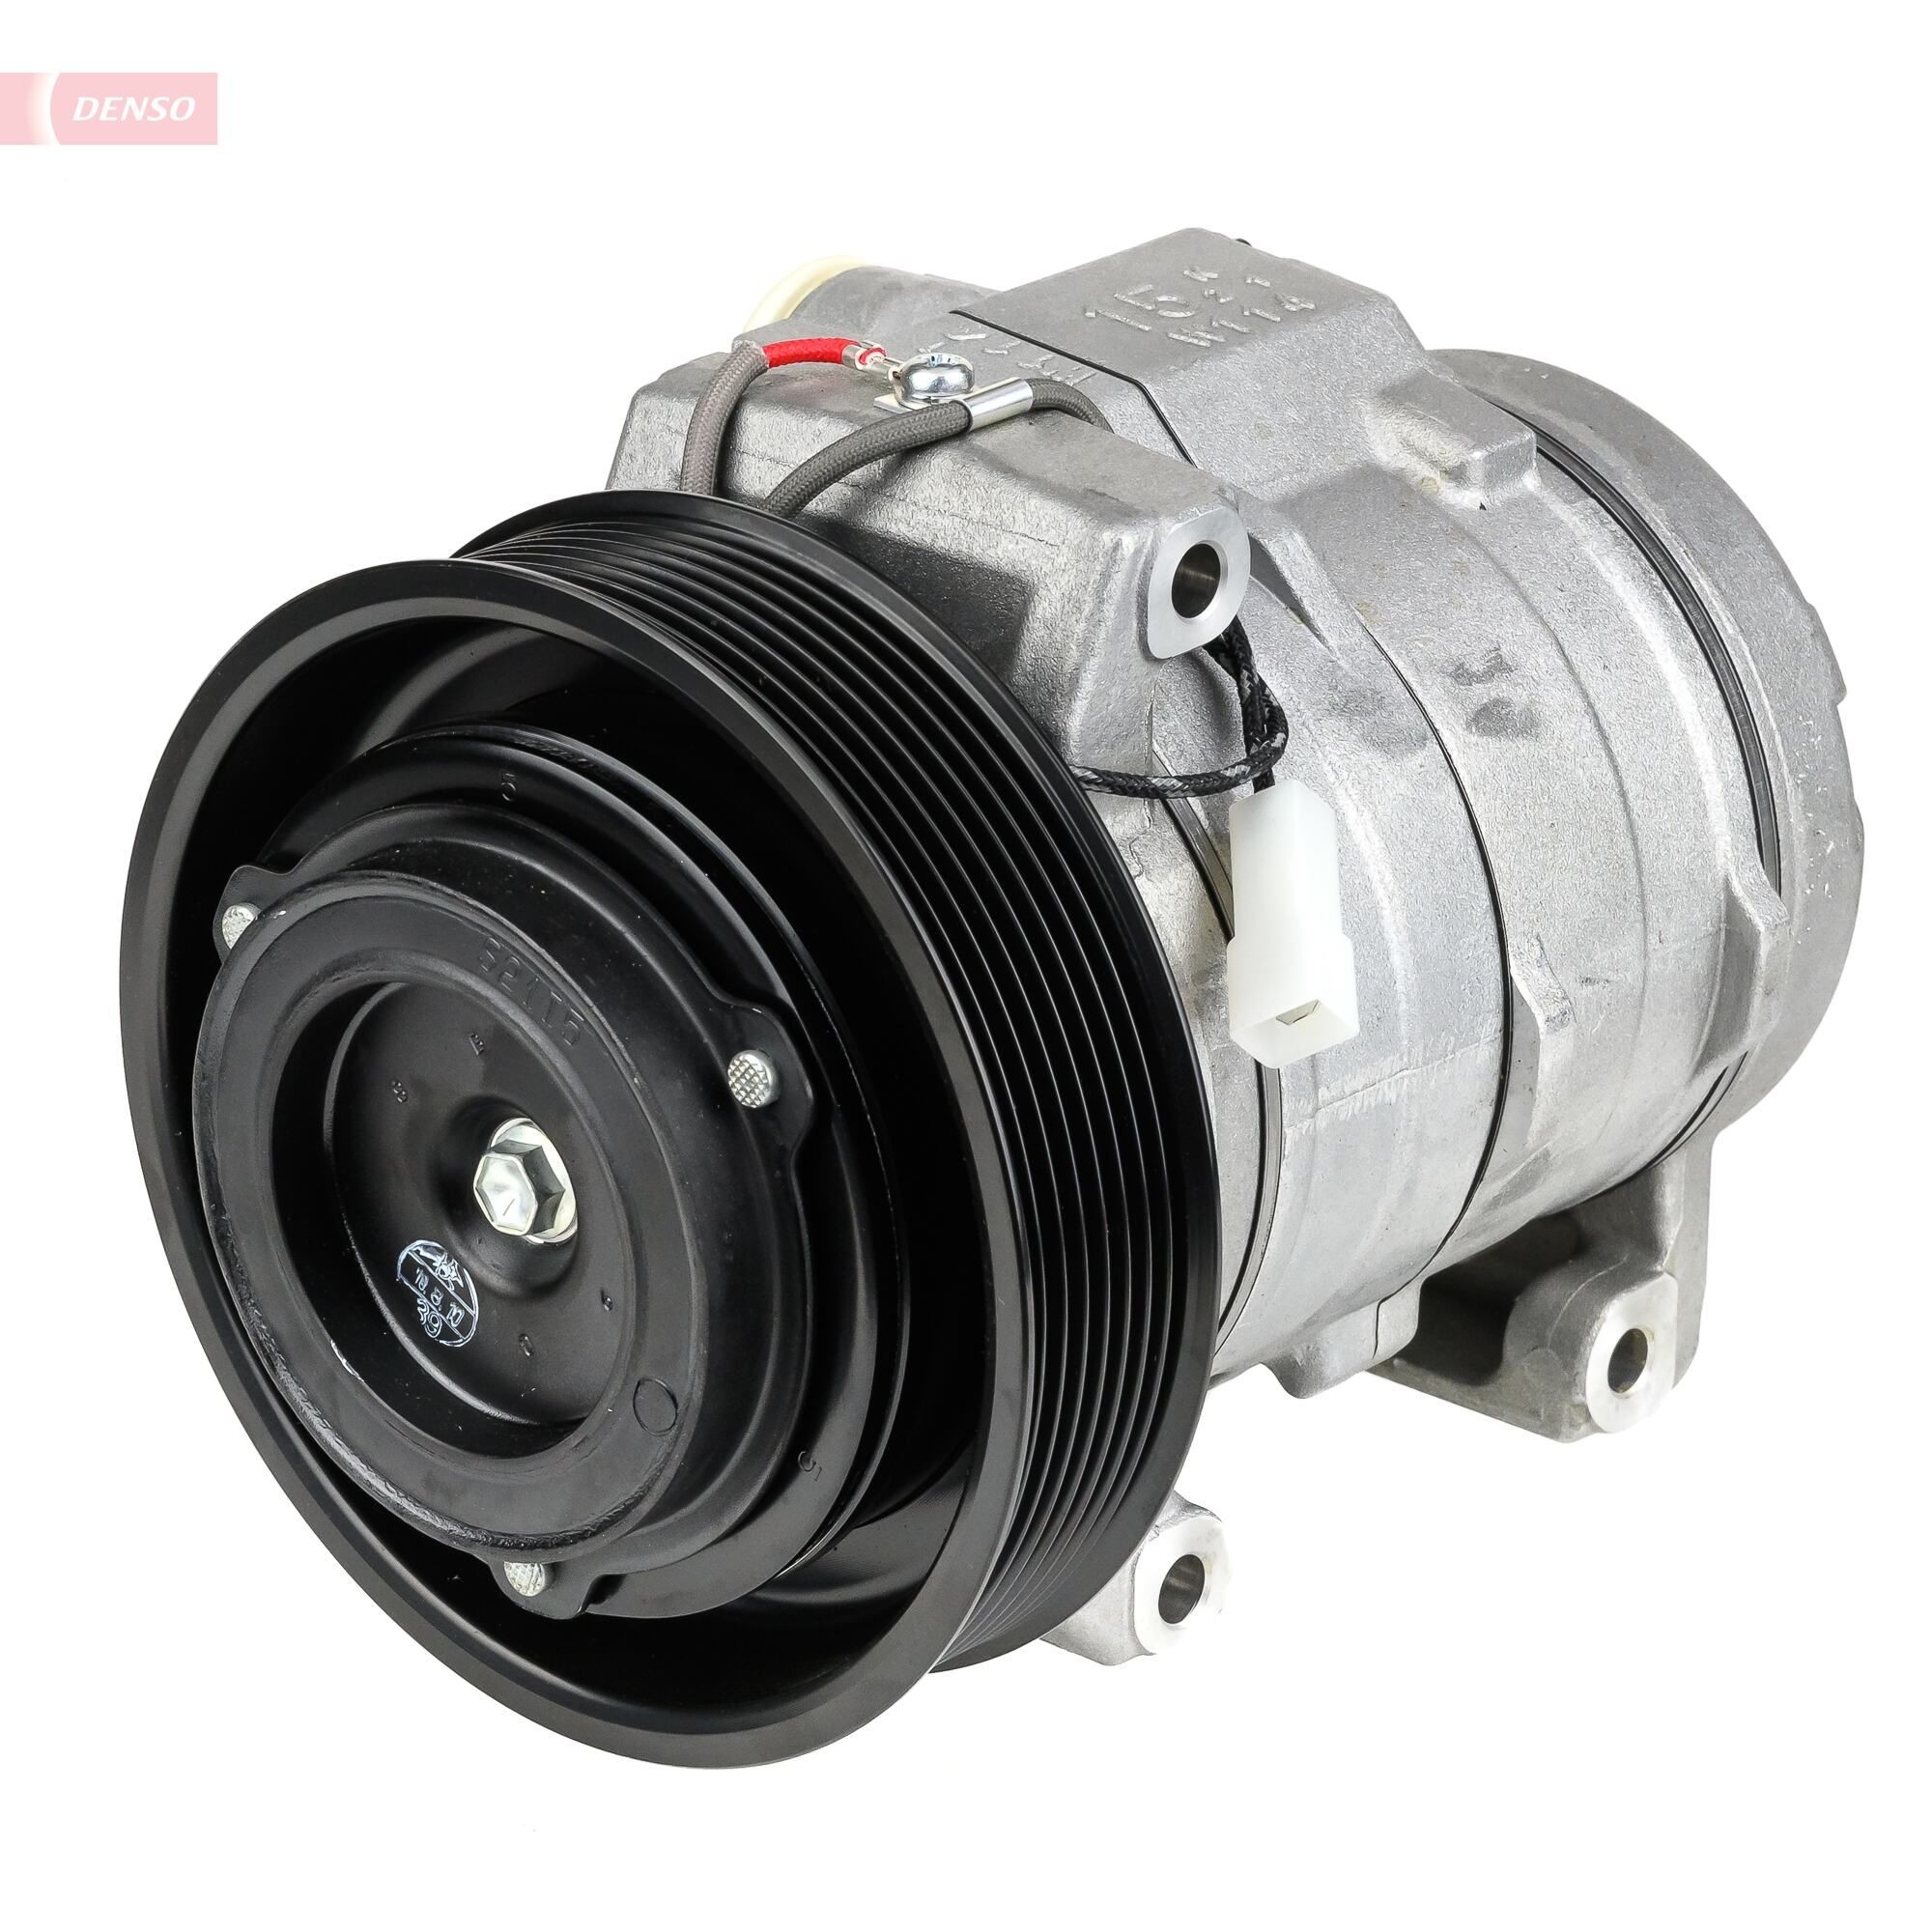 DENSO 10S15C, 24V, PAG 46, R 134a, with magnetic clutch Belt Pulley Ø: 140mm, Number of grooves: 8 AC compressor DCP17186 buy